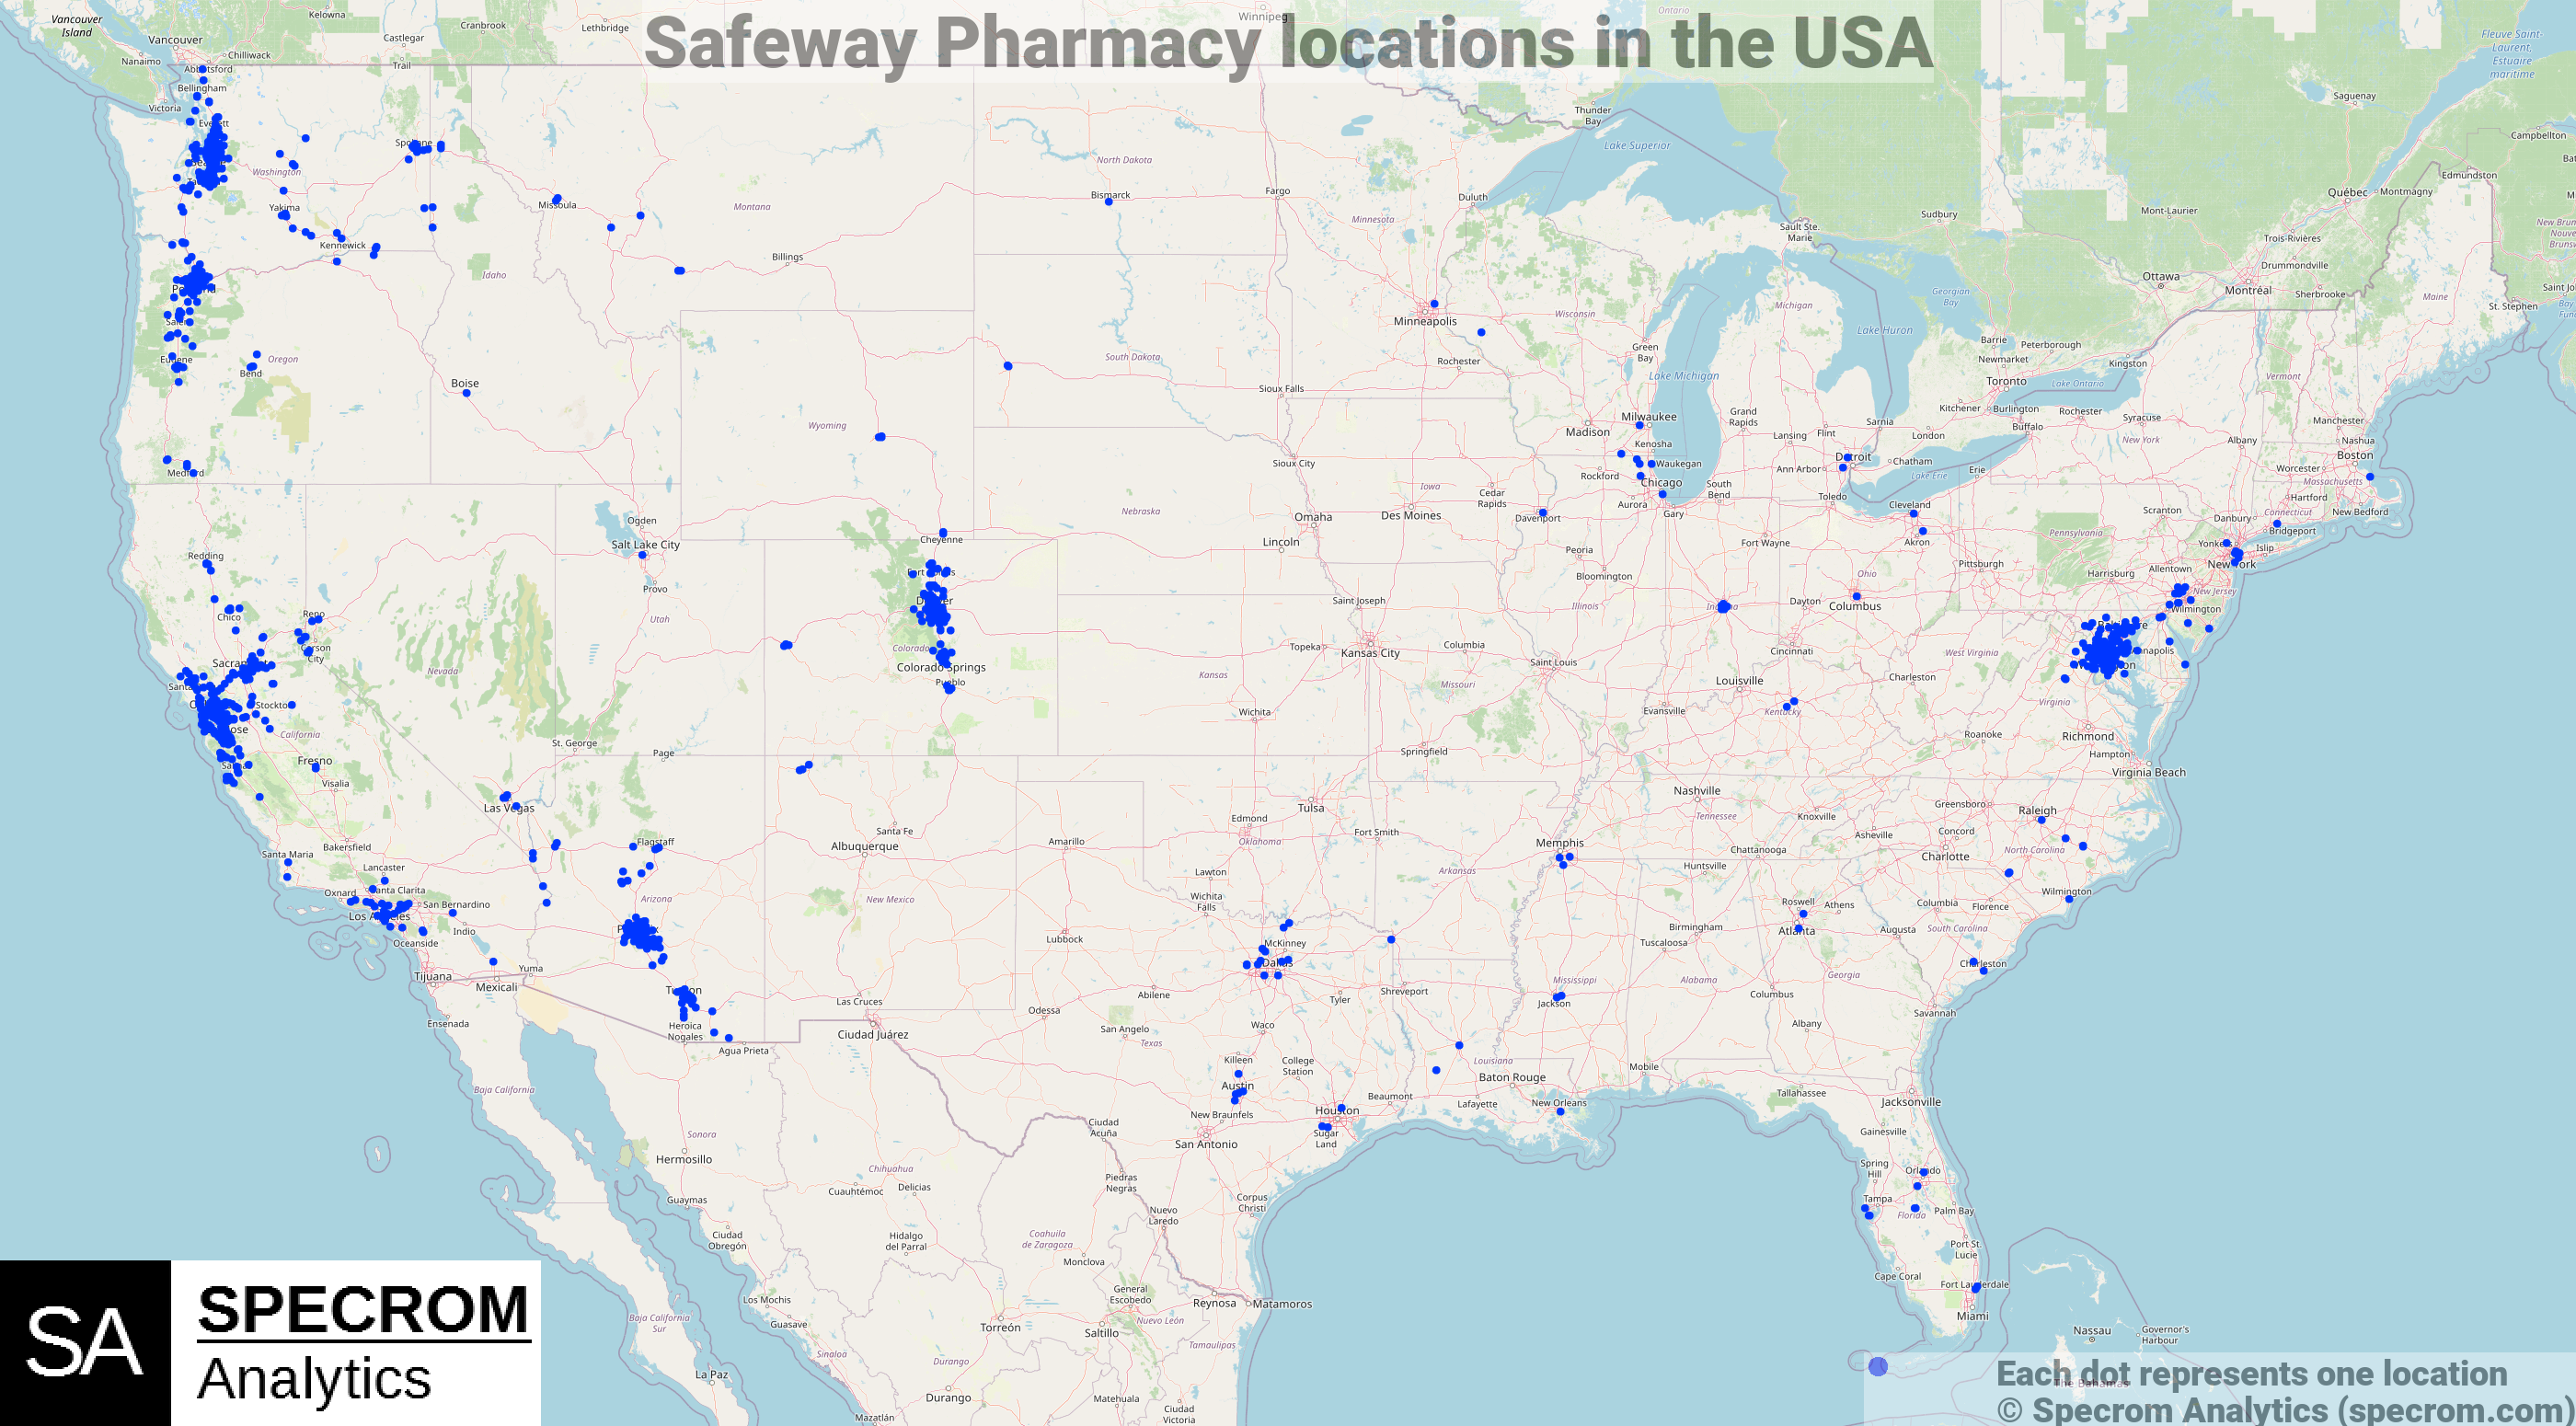 Safeway Pharmacy locations in the USA